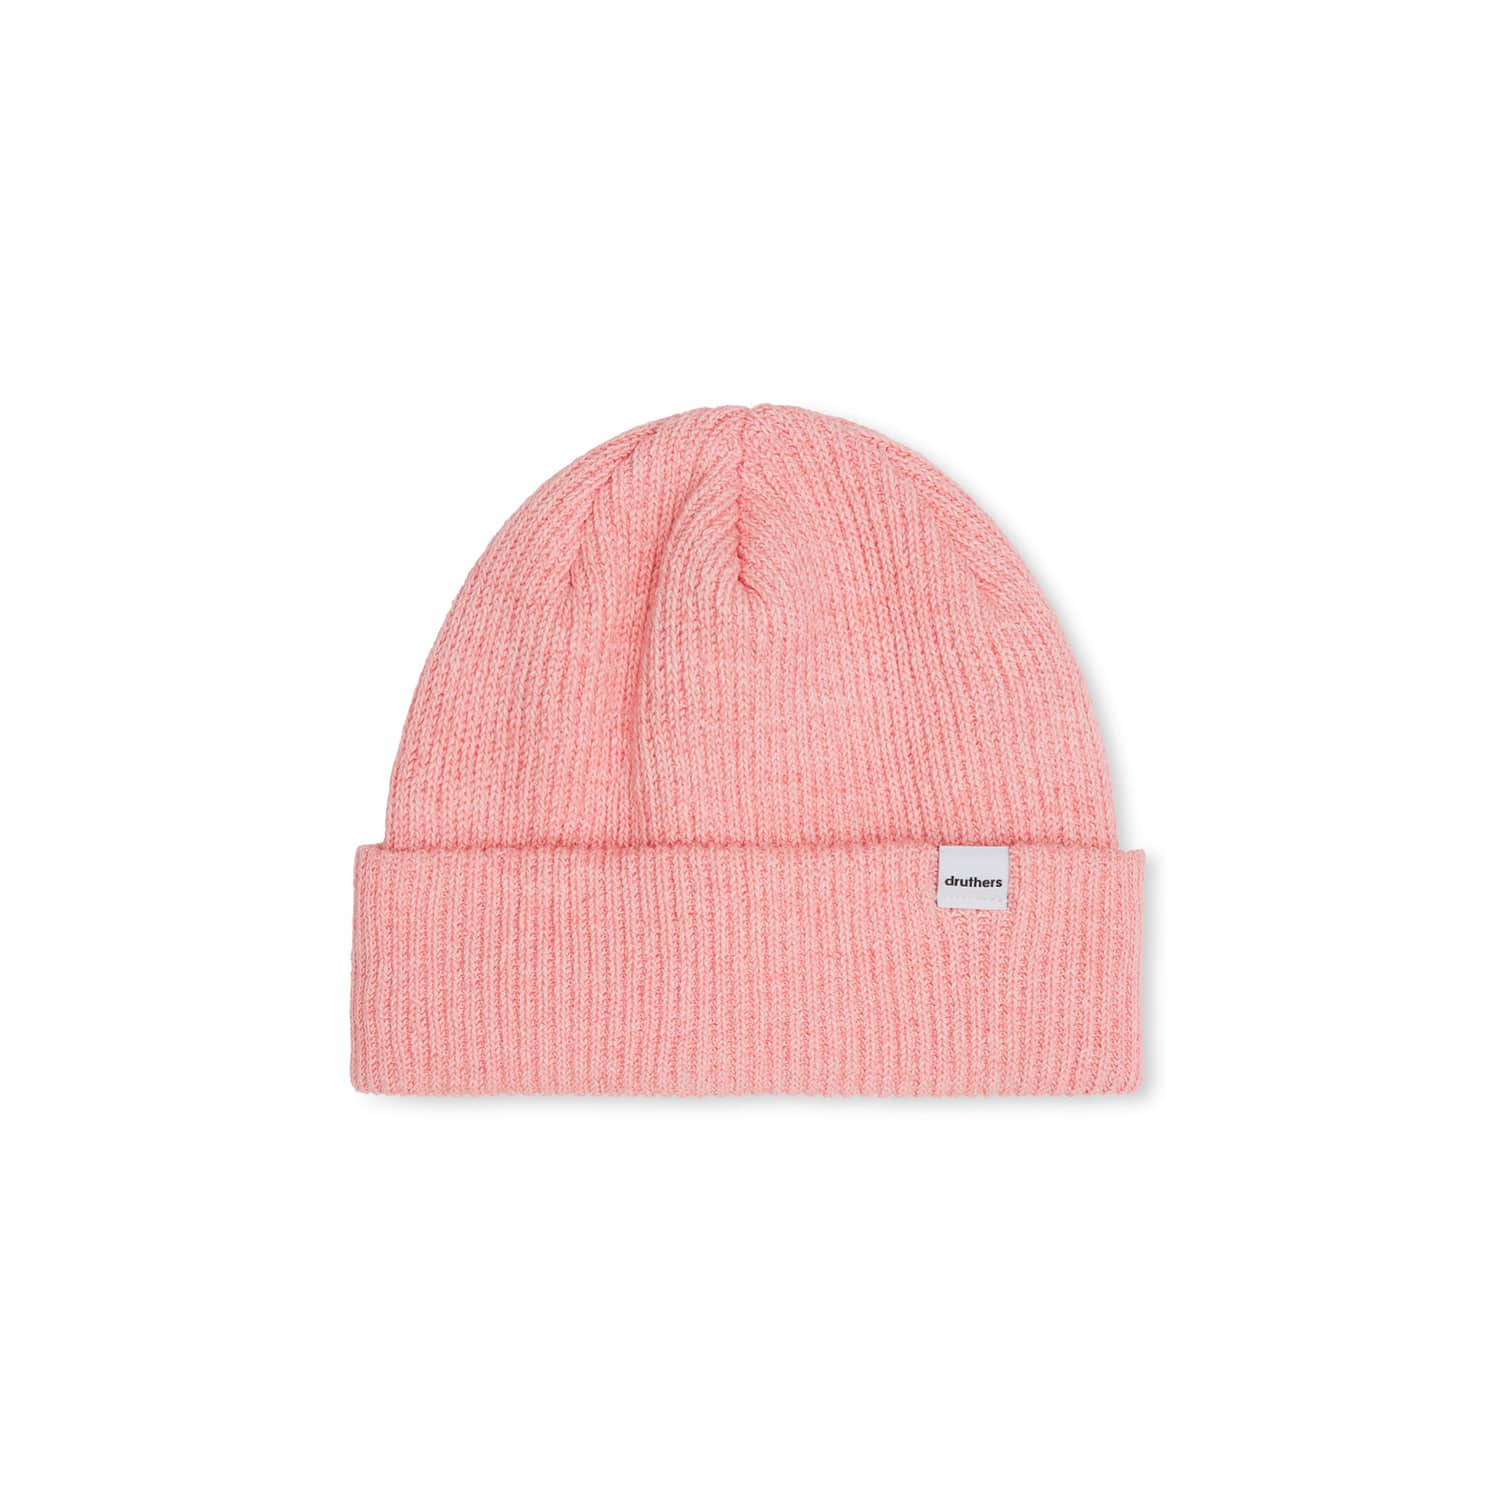 Druthers NYC Recycled Cotton Knit Beanie